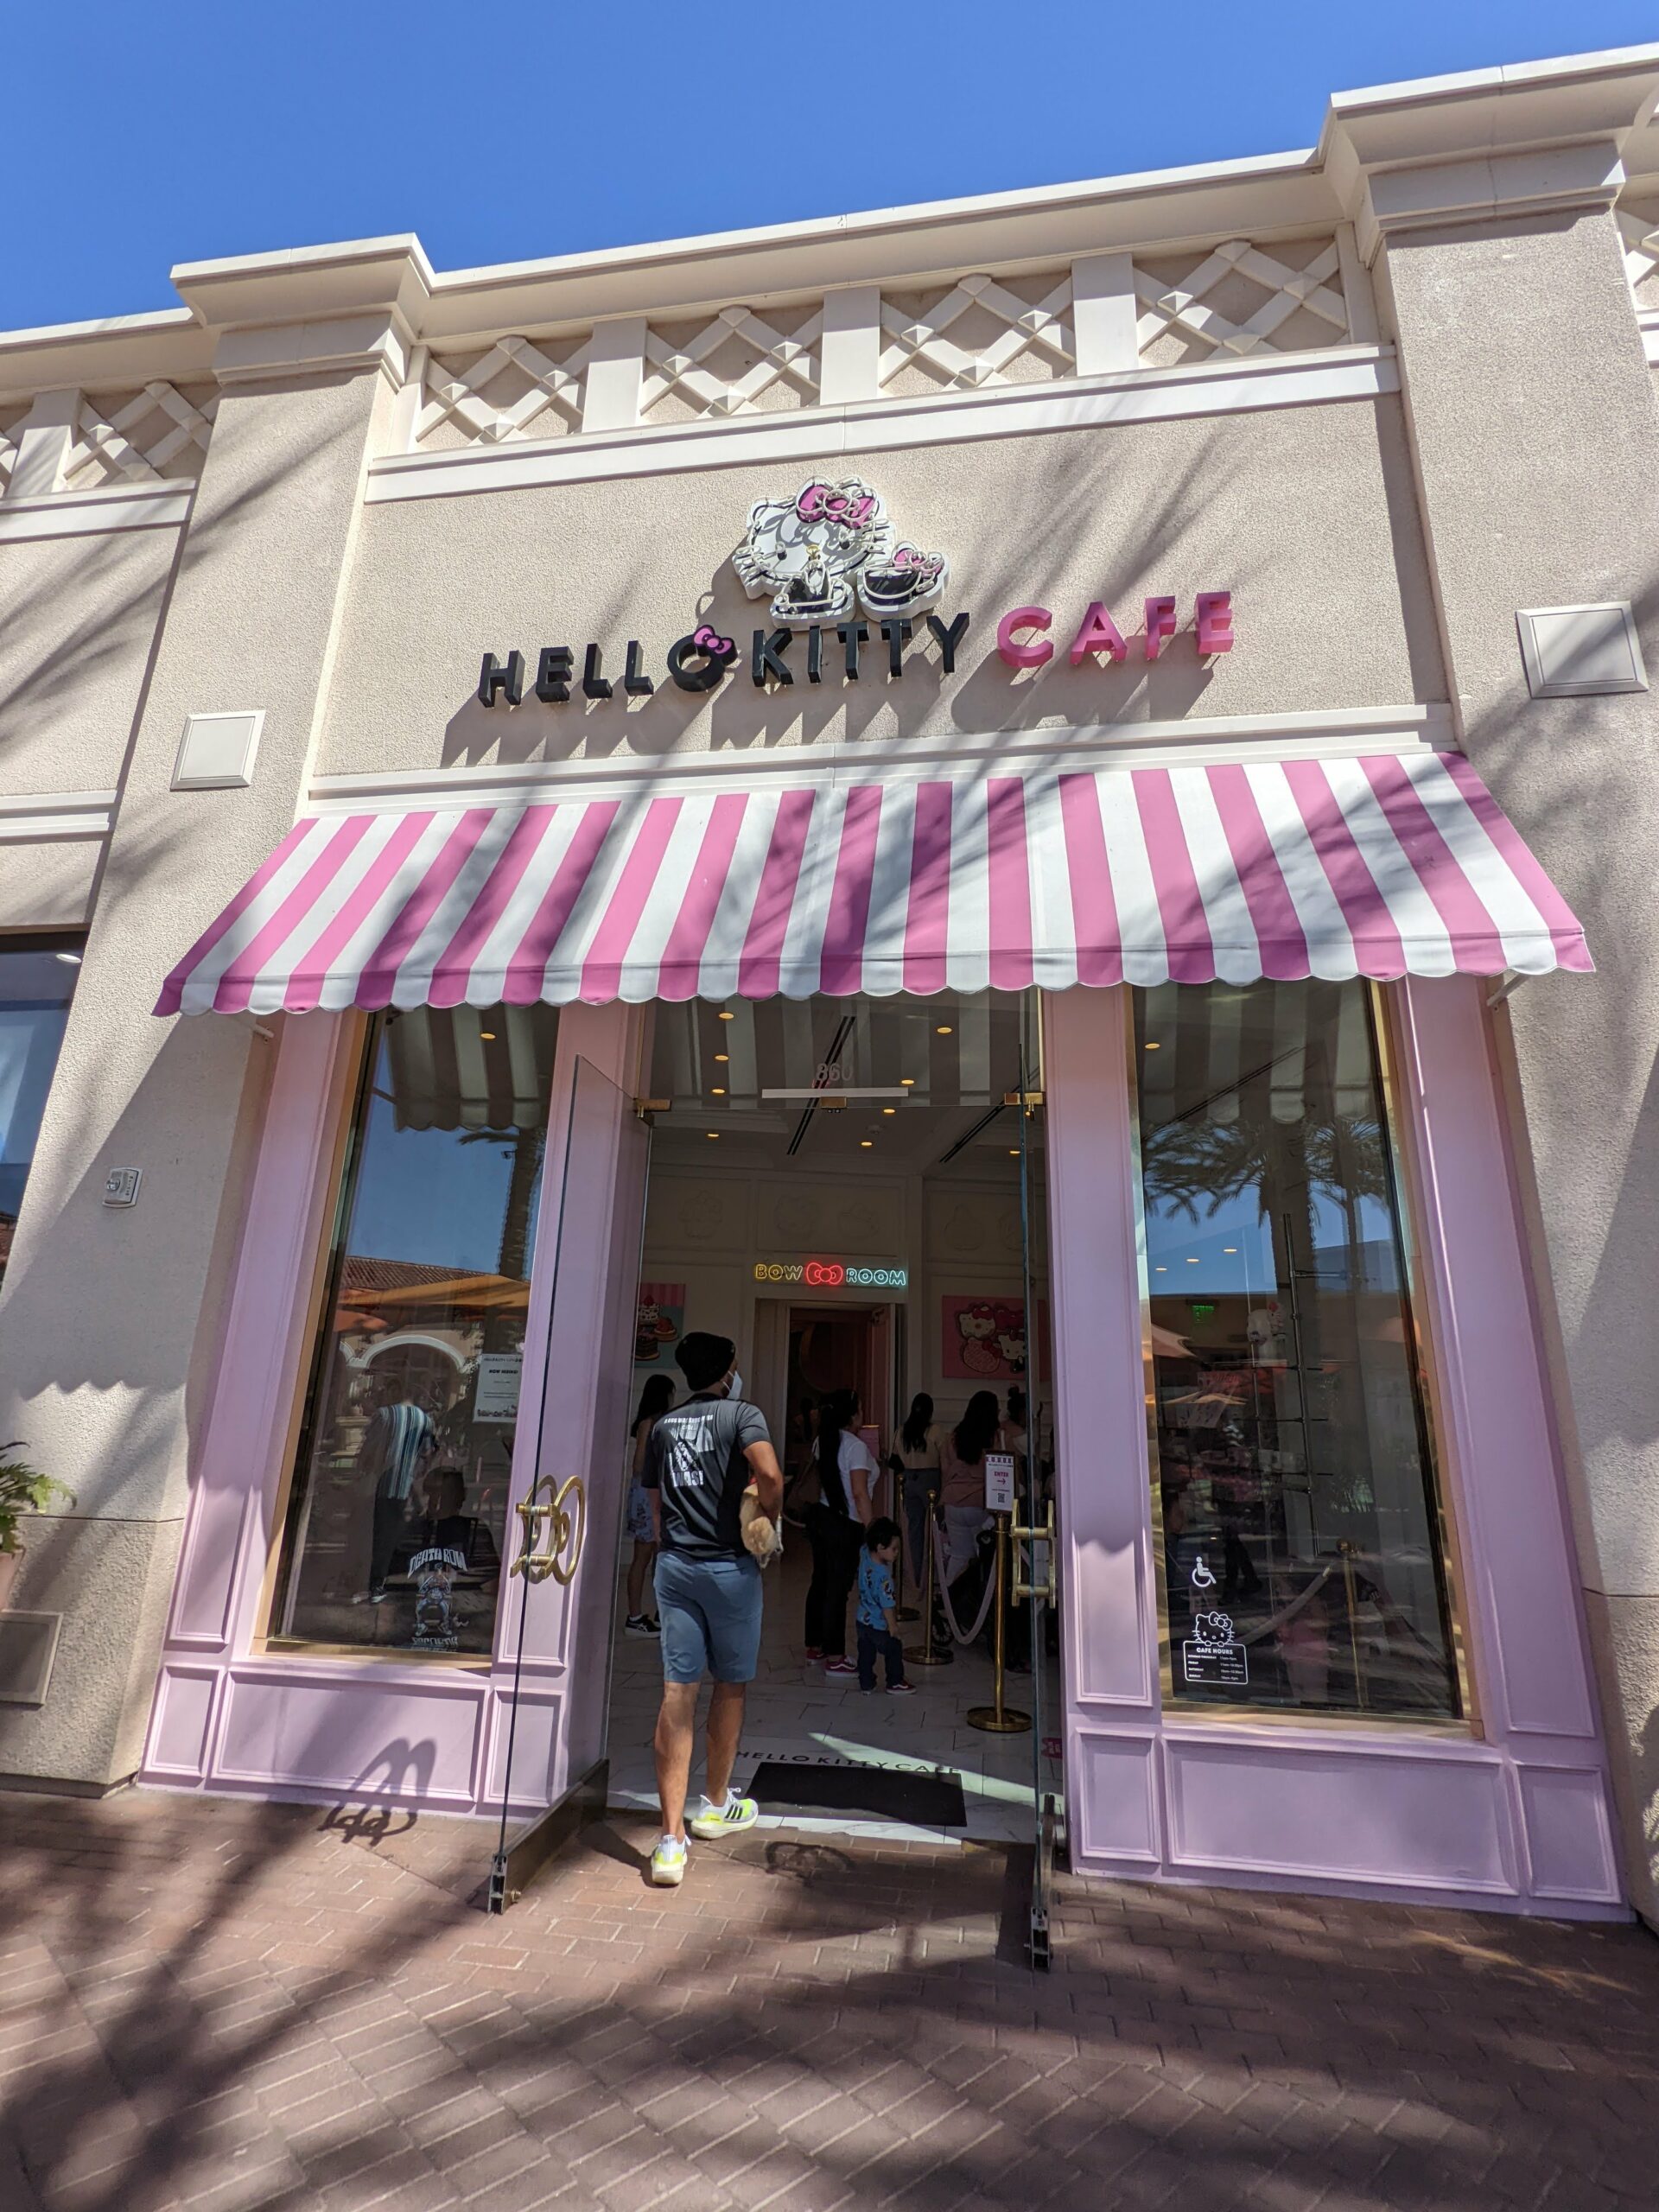 had the pleasure of visiting the hello kitty cafe in las vegas